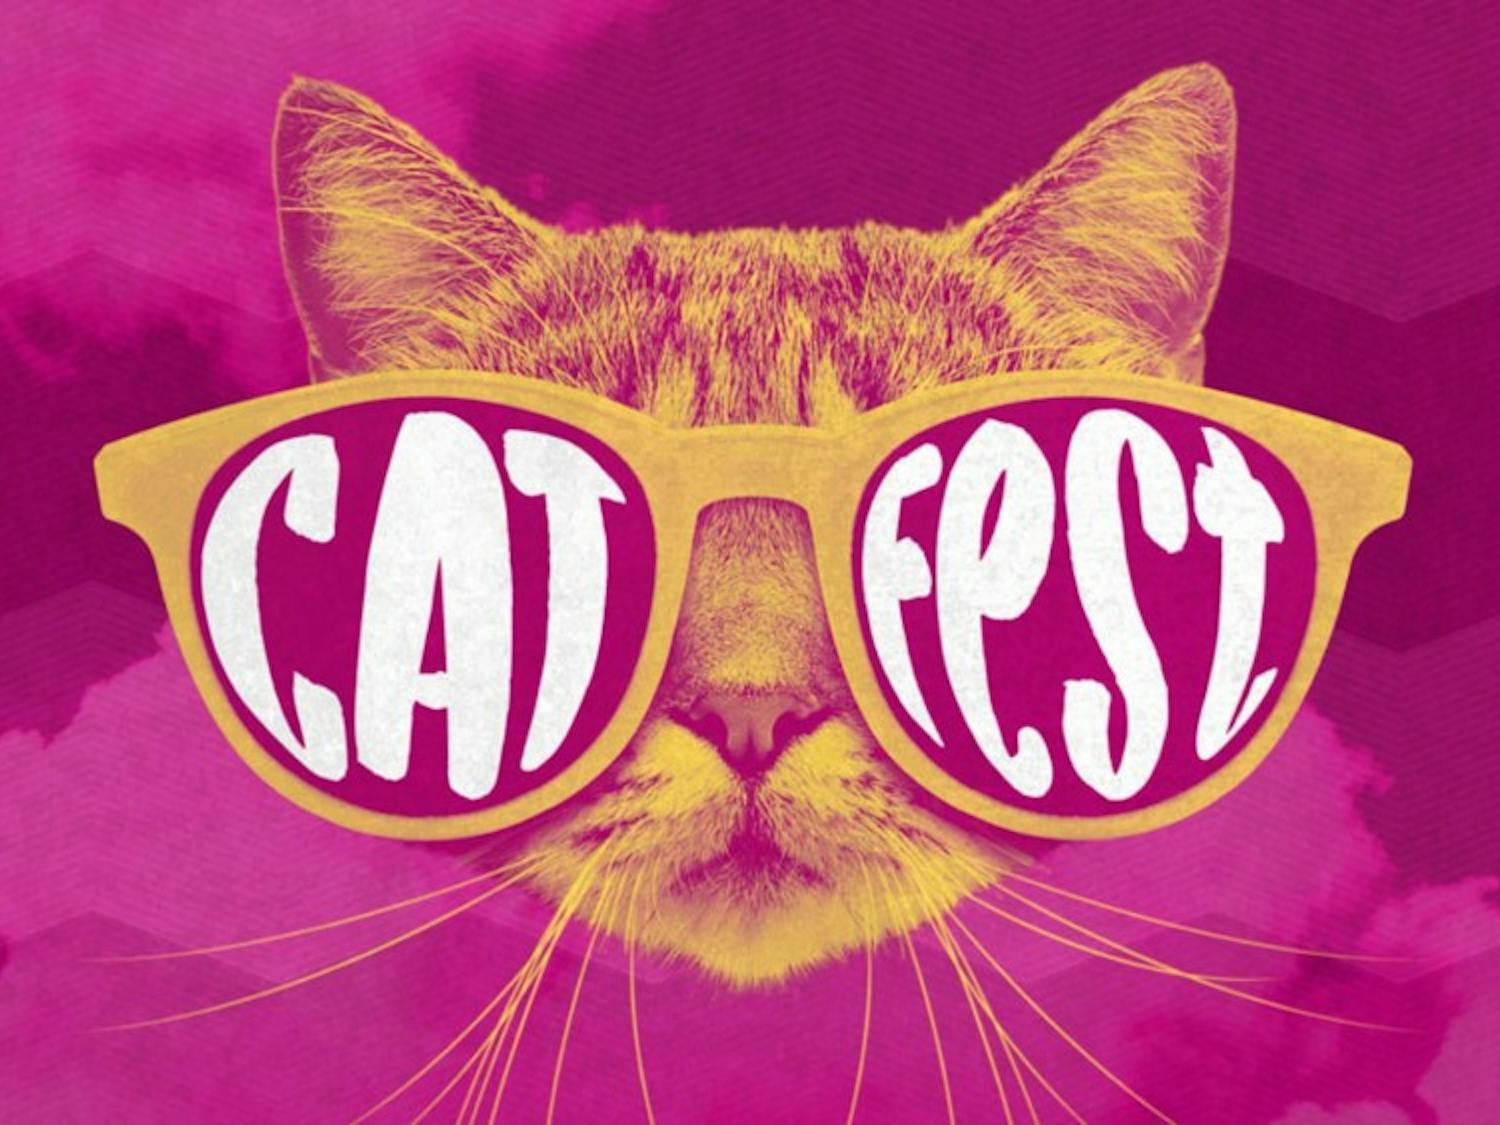 Cat Fest will occur in Raleigh on Oct. 5. Photo courtesy of Pam Miller.